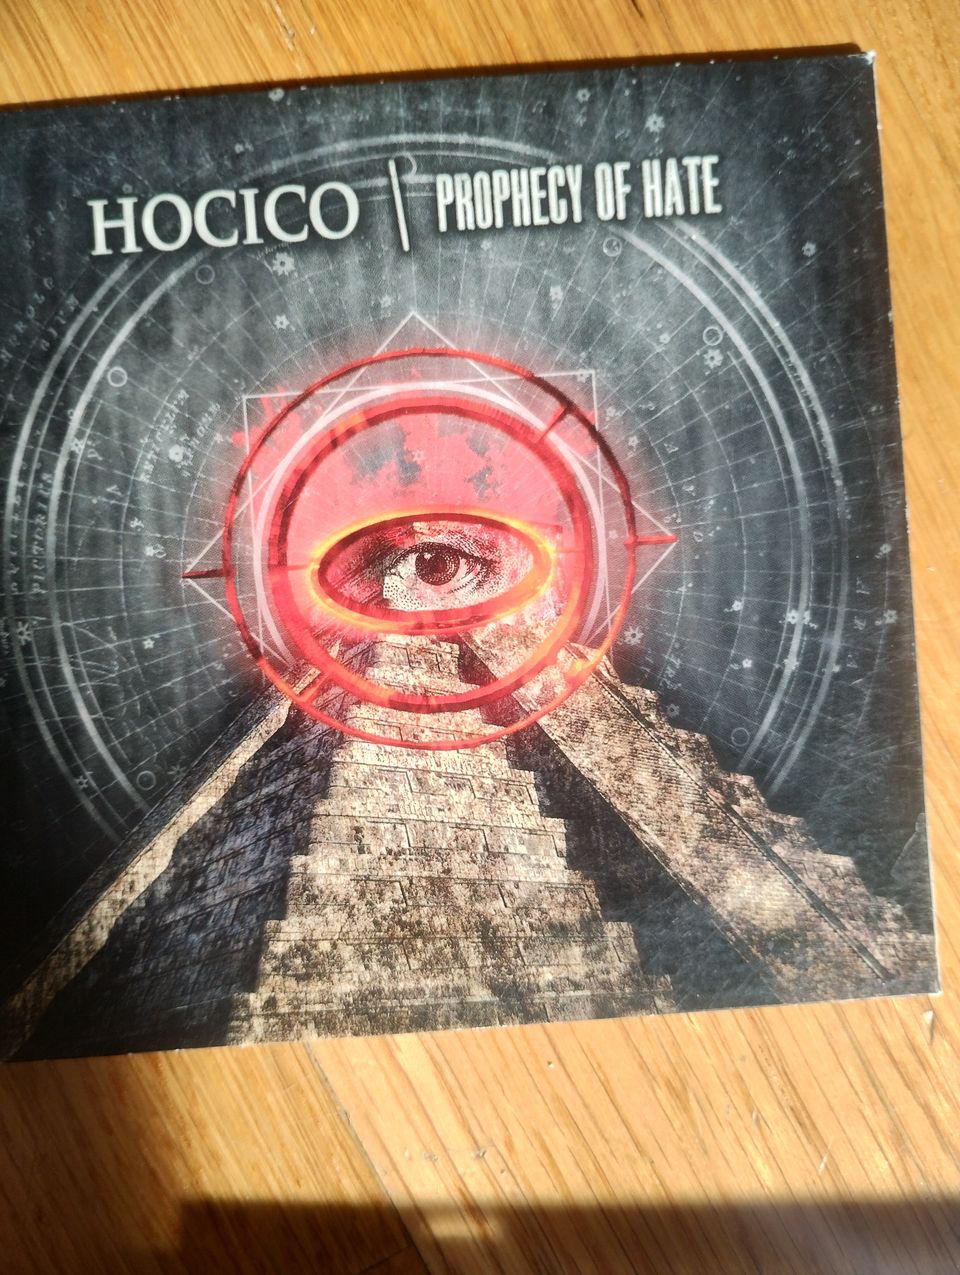 Hocico prophecy of hate